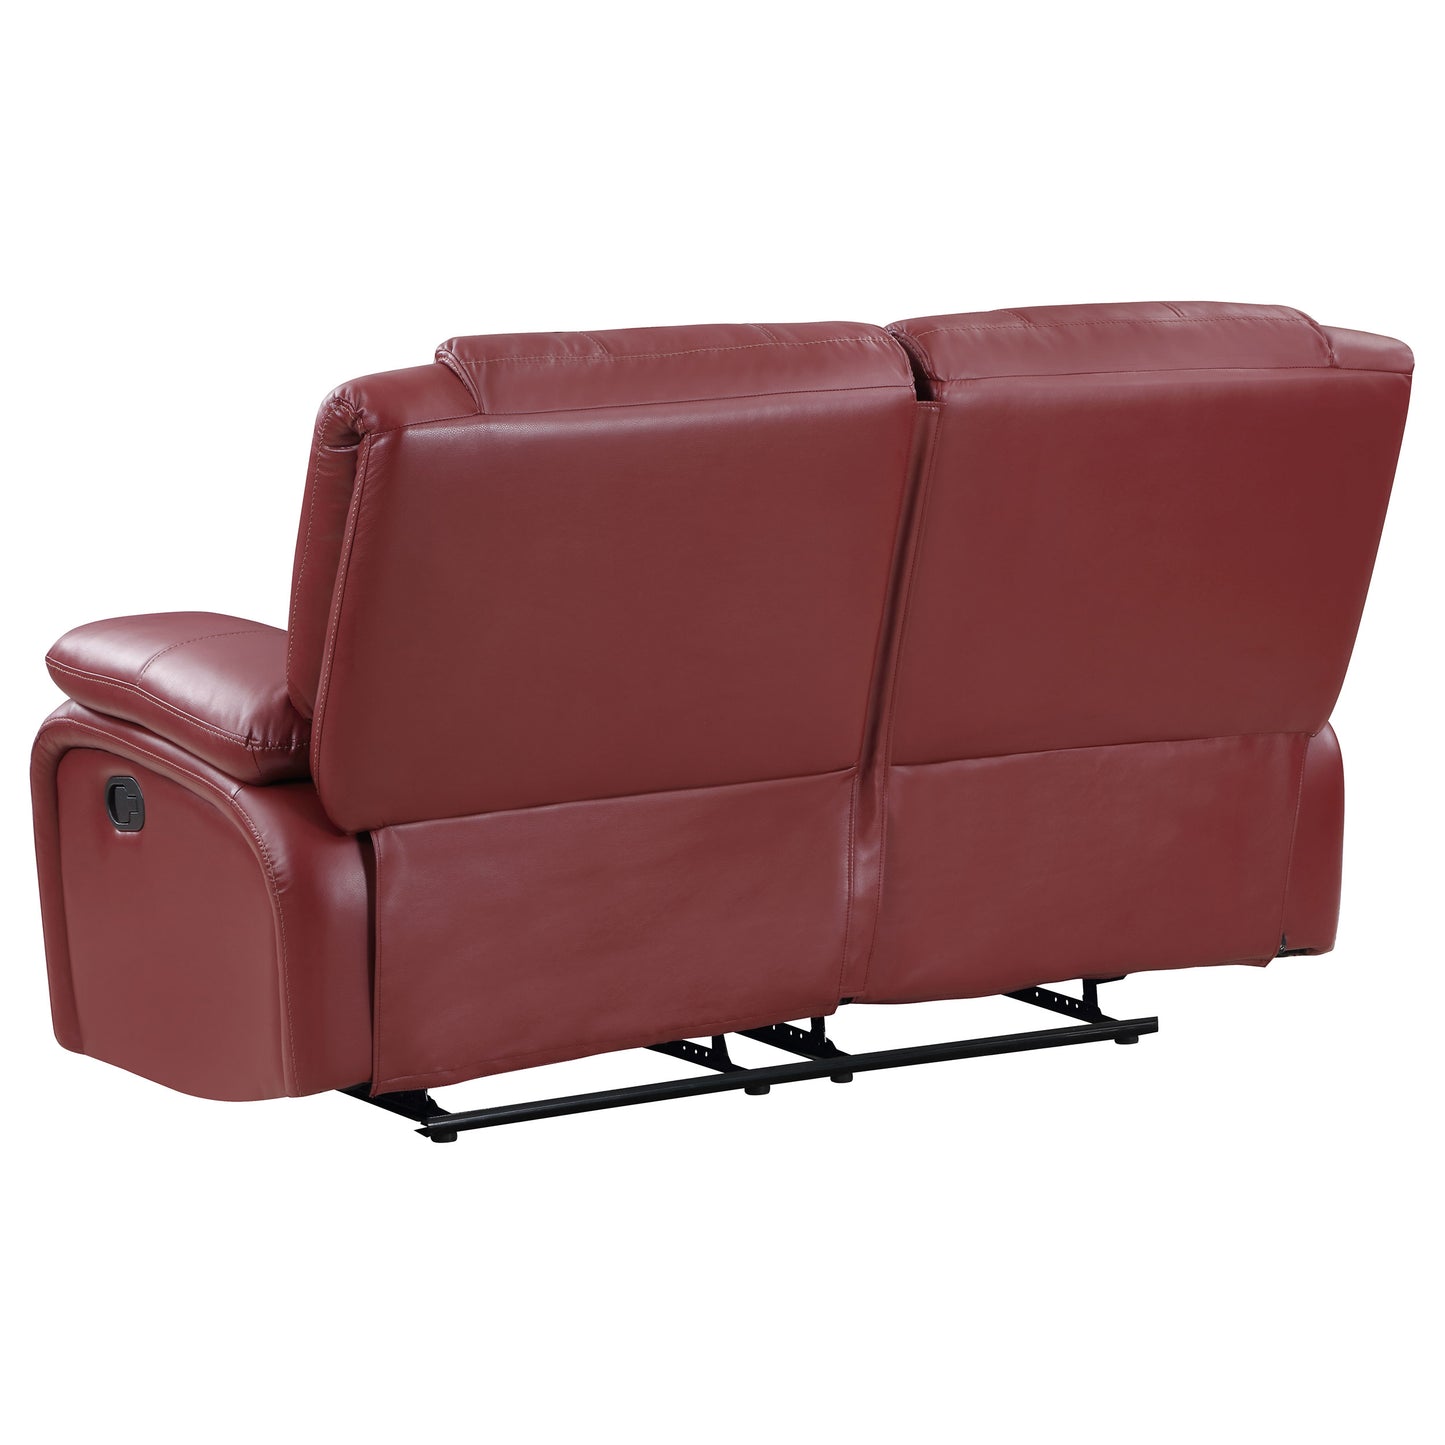 Camila 2-piece Upholstered Reclining Sofa Set Red Faux Leather